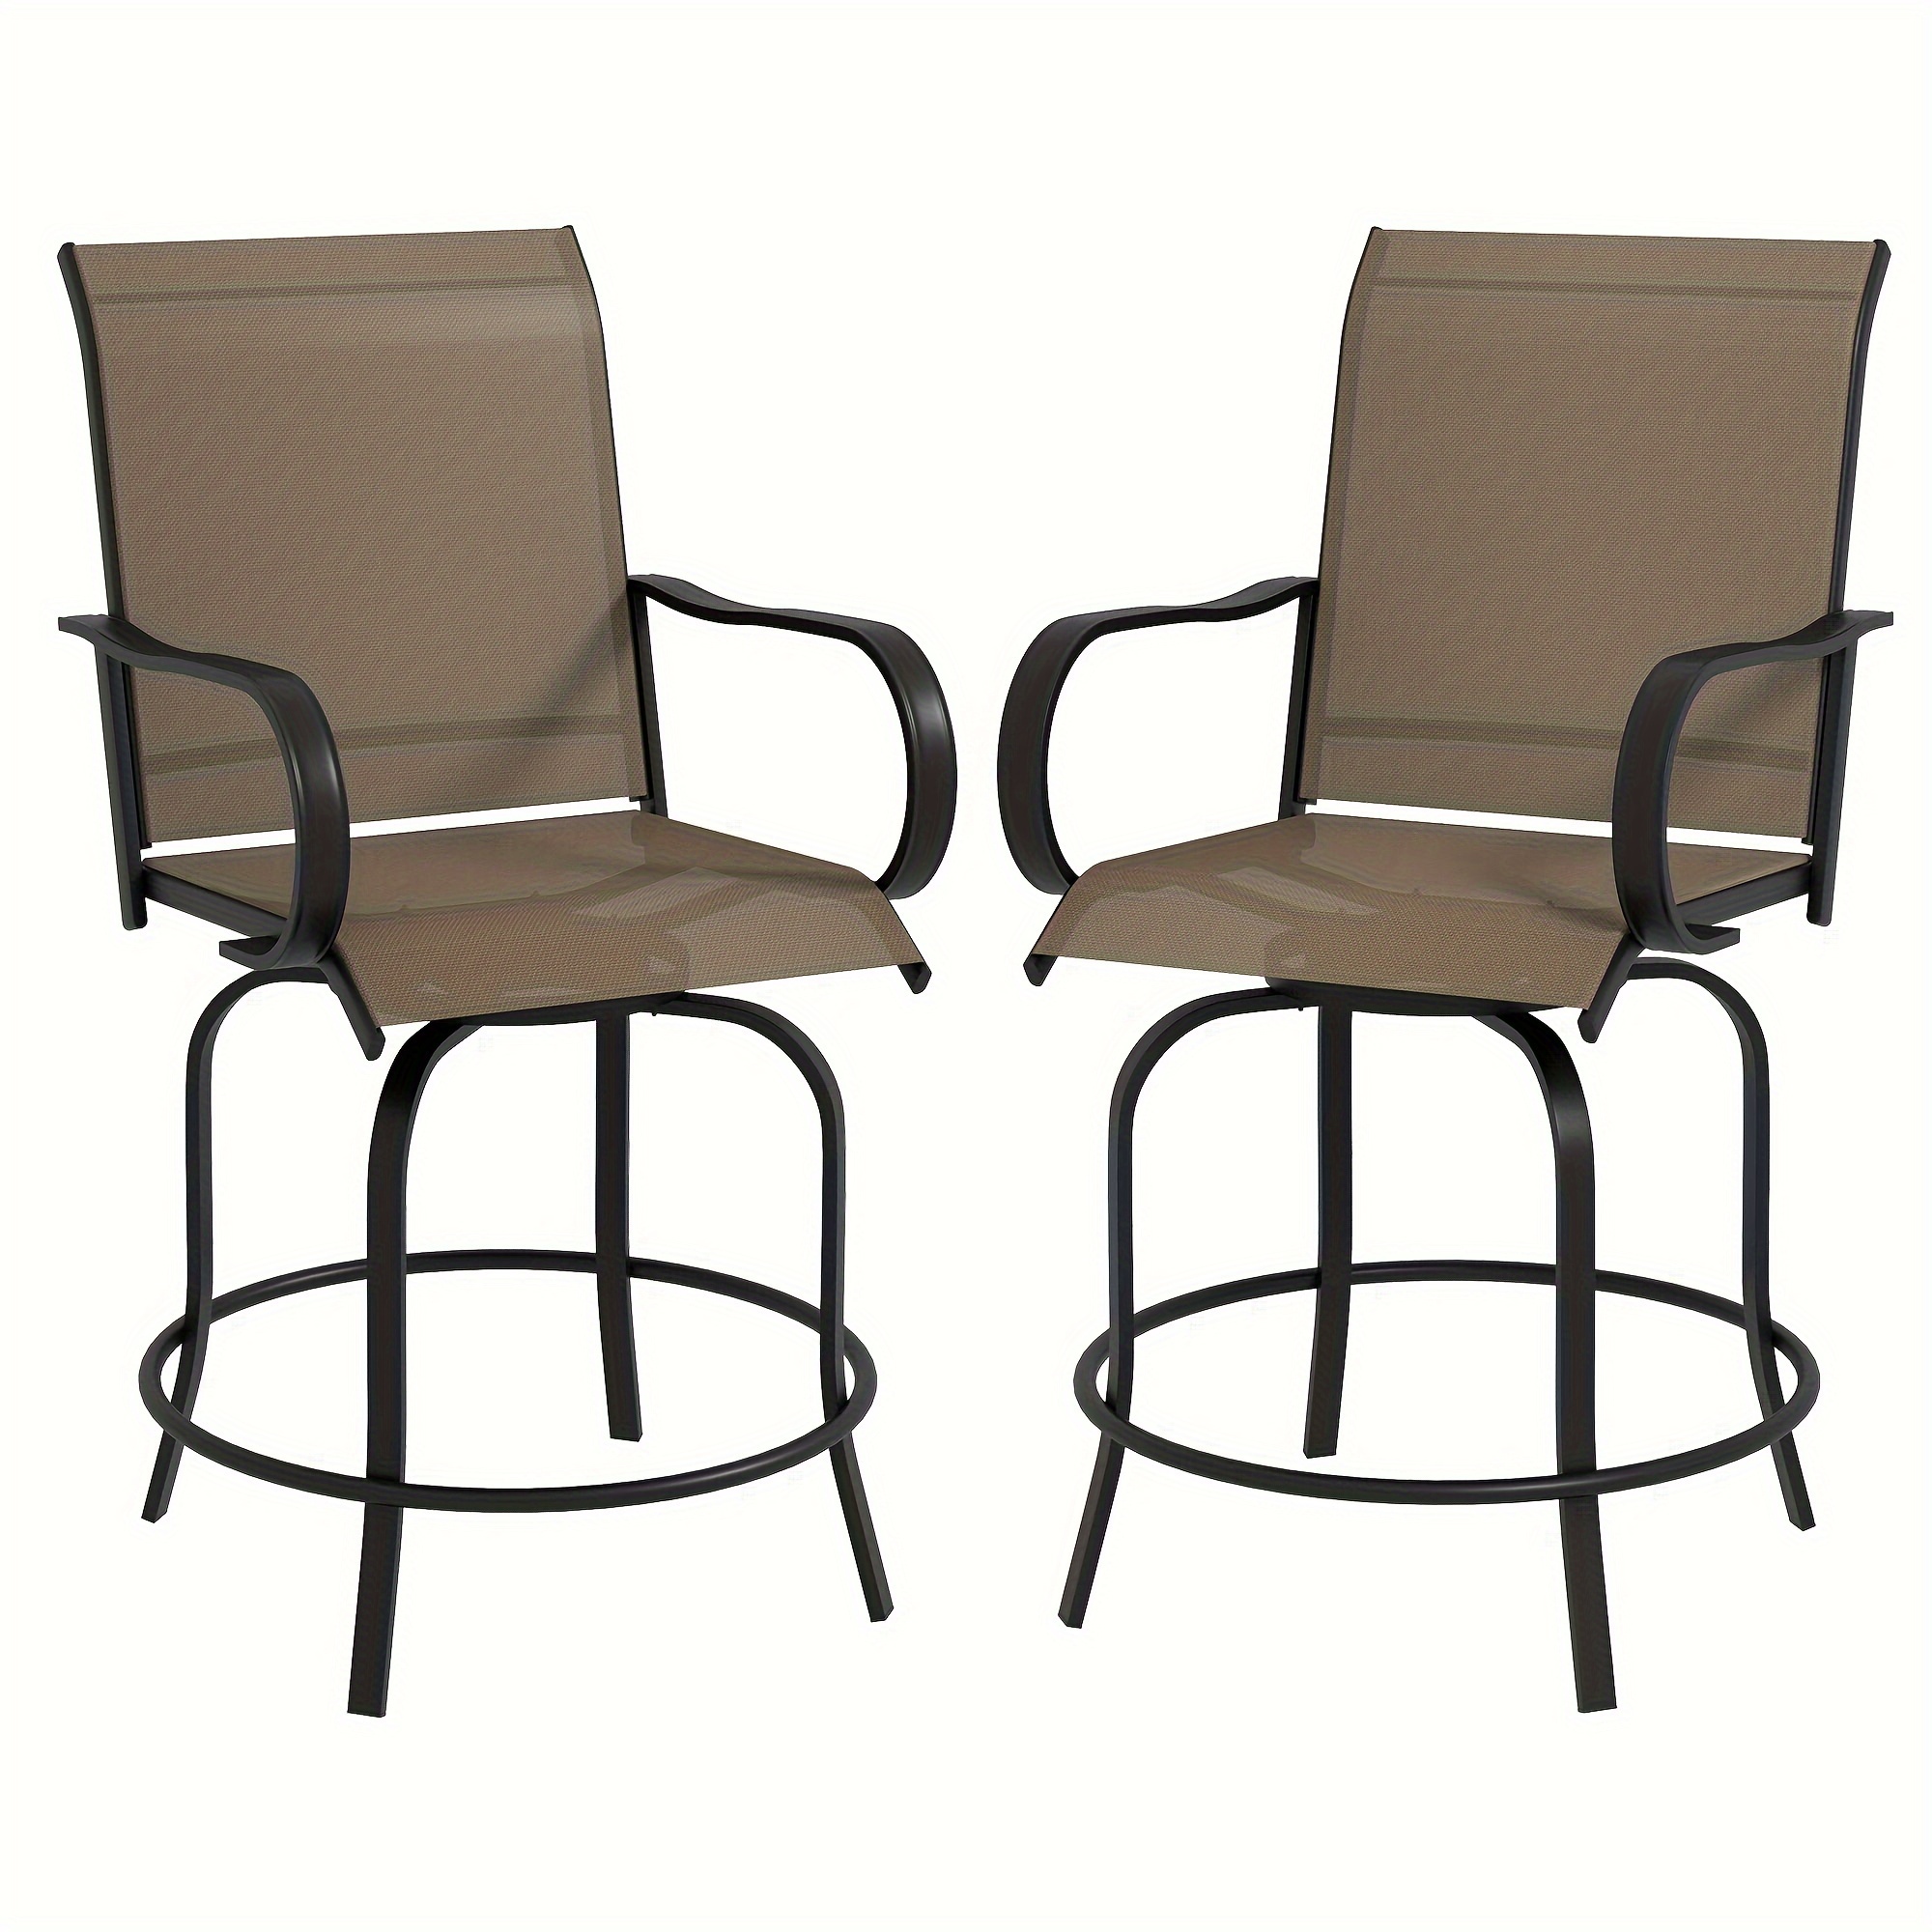 

Outsunny Outdoor Bar Stools With Armrests, Set Of 2 360° Swivel Bar Height Patio Chairs With High-density Mesh Fabric, Steel Frame Dining Chairs For Balcony, Poolside, Backyard